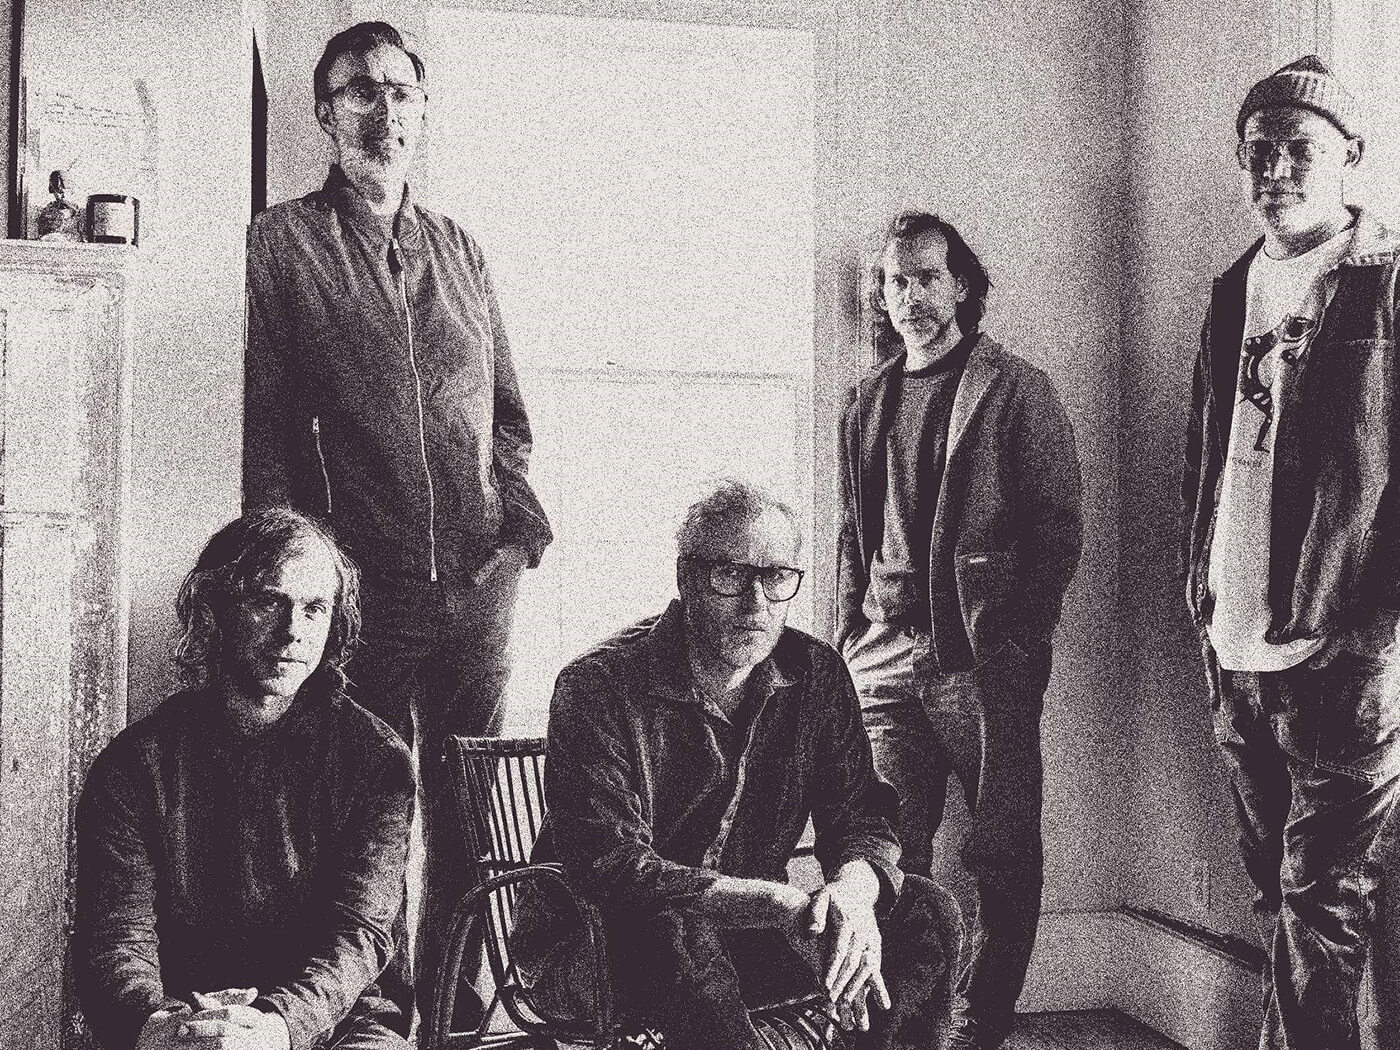 The National share new single “Tropic Morning News”, announce album and UK shows